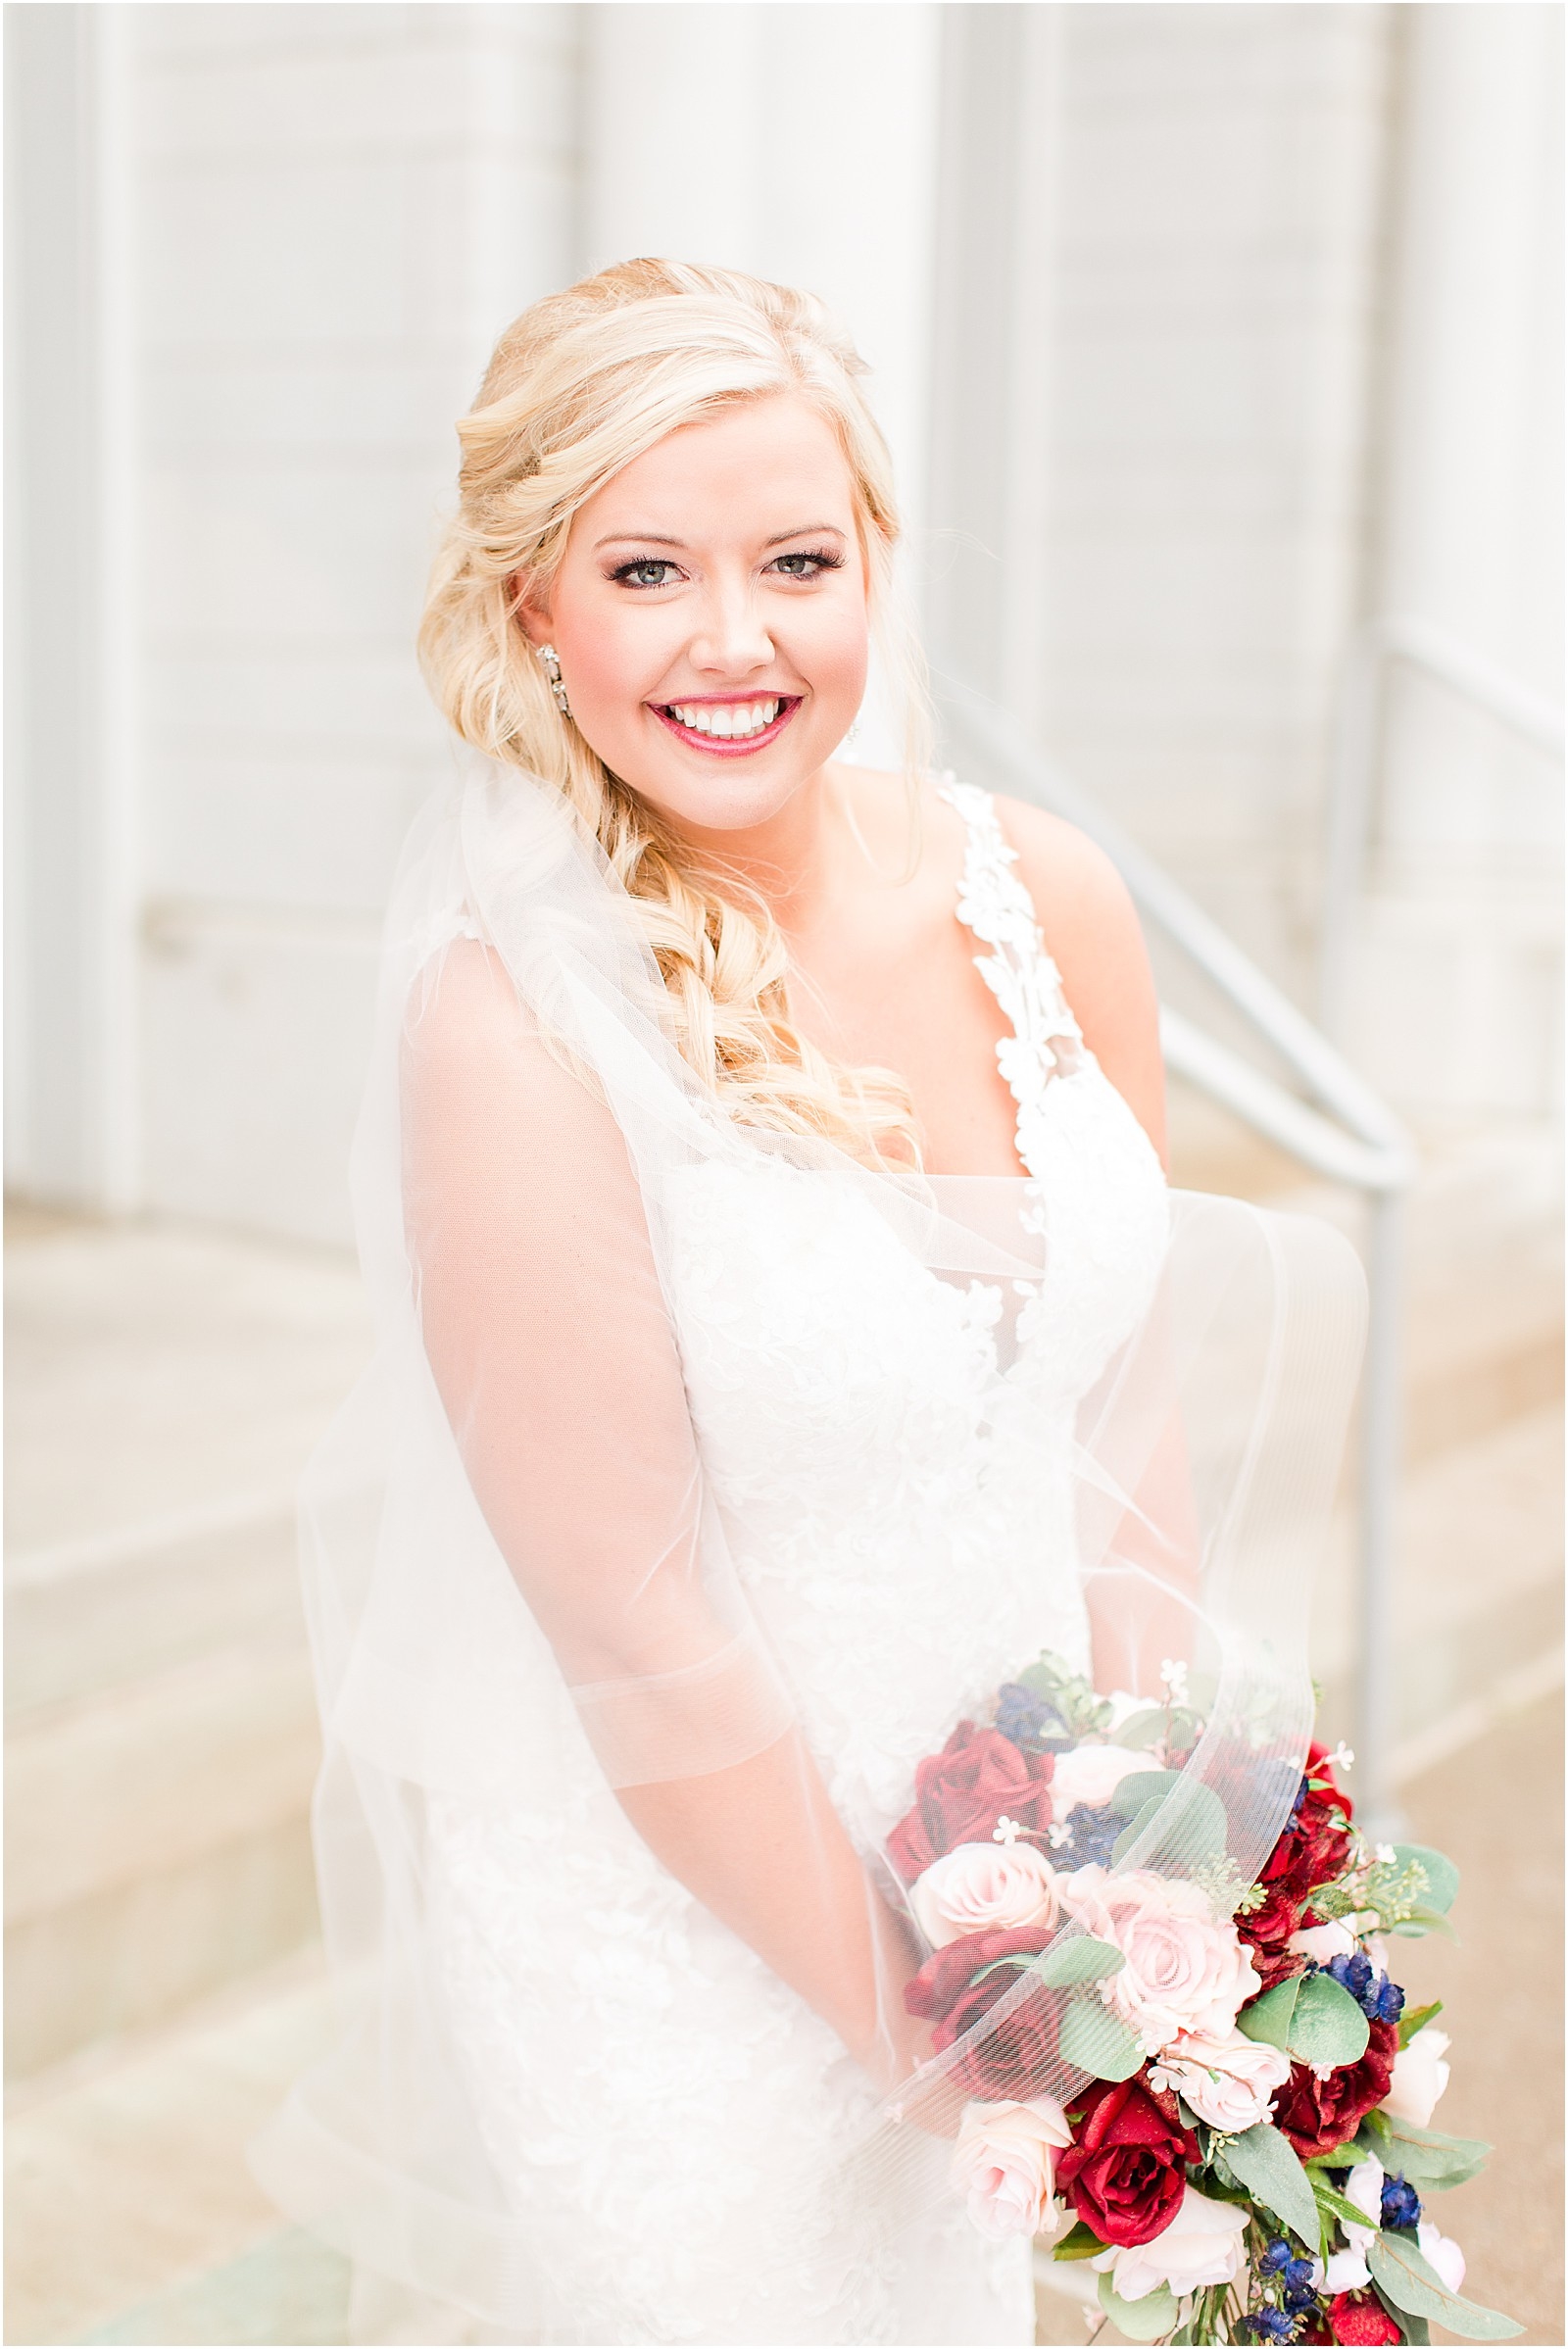 Haylee and Dillon's Evansville, Indiana wedding by Bret and Brandie Photography.0052.jpg